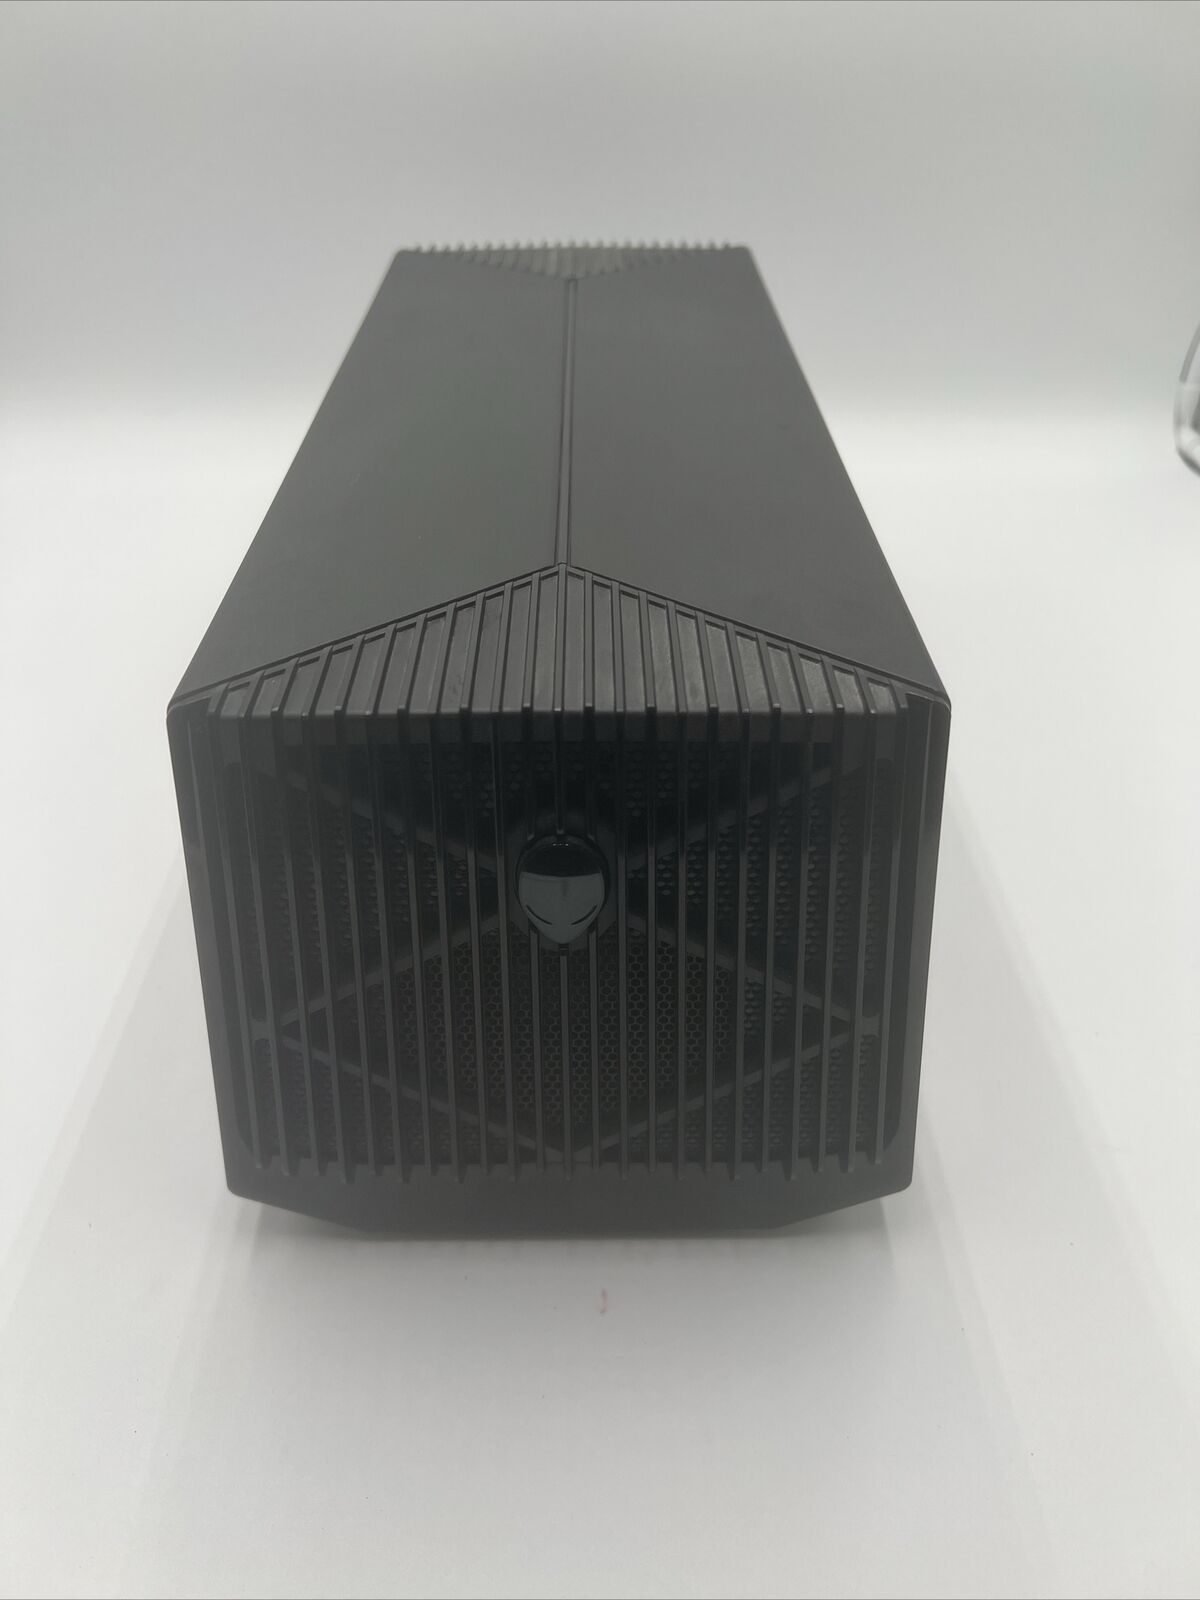 Dell Alienware Graphics Amplifier Model Z01G (does not include GPU shown)